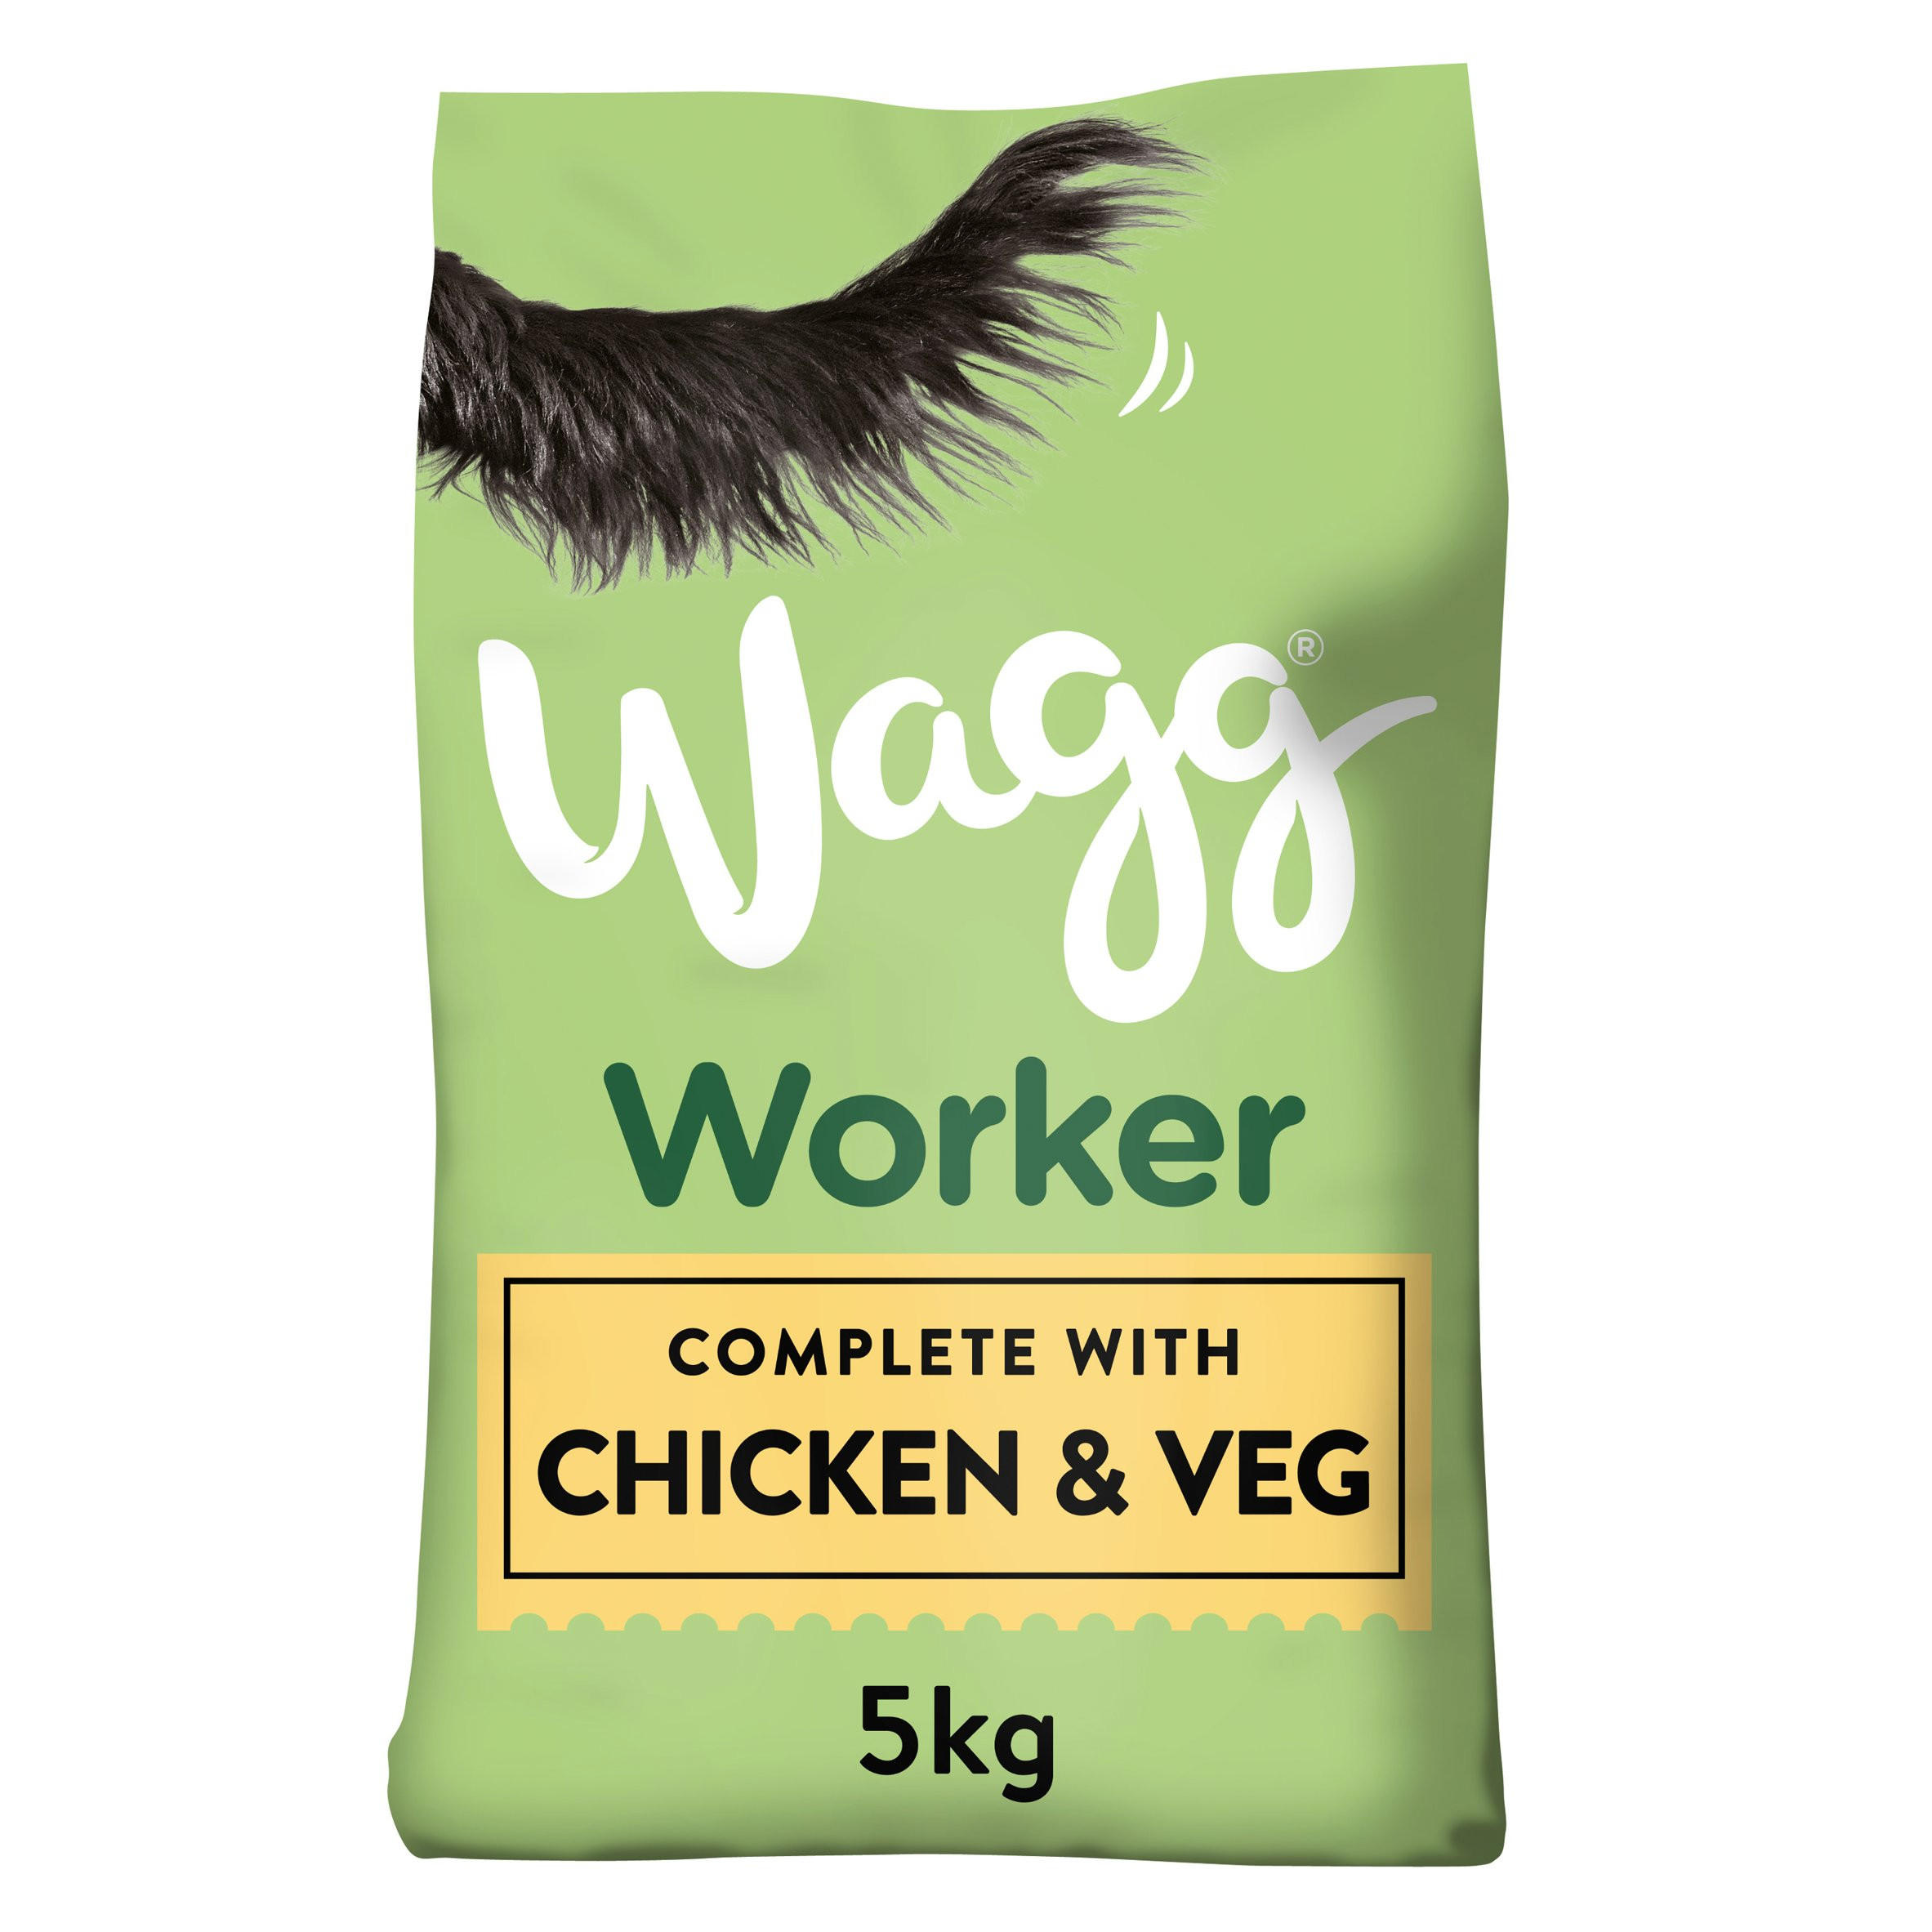 wagg worker complete